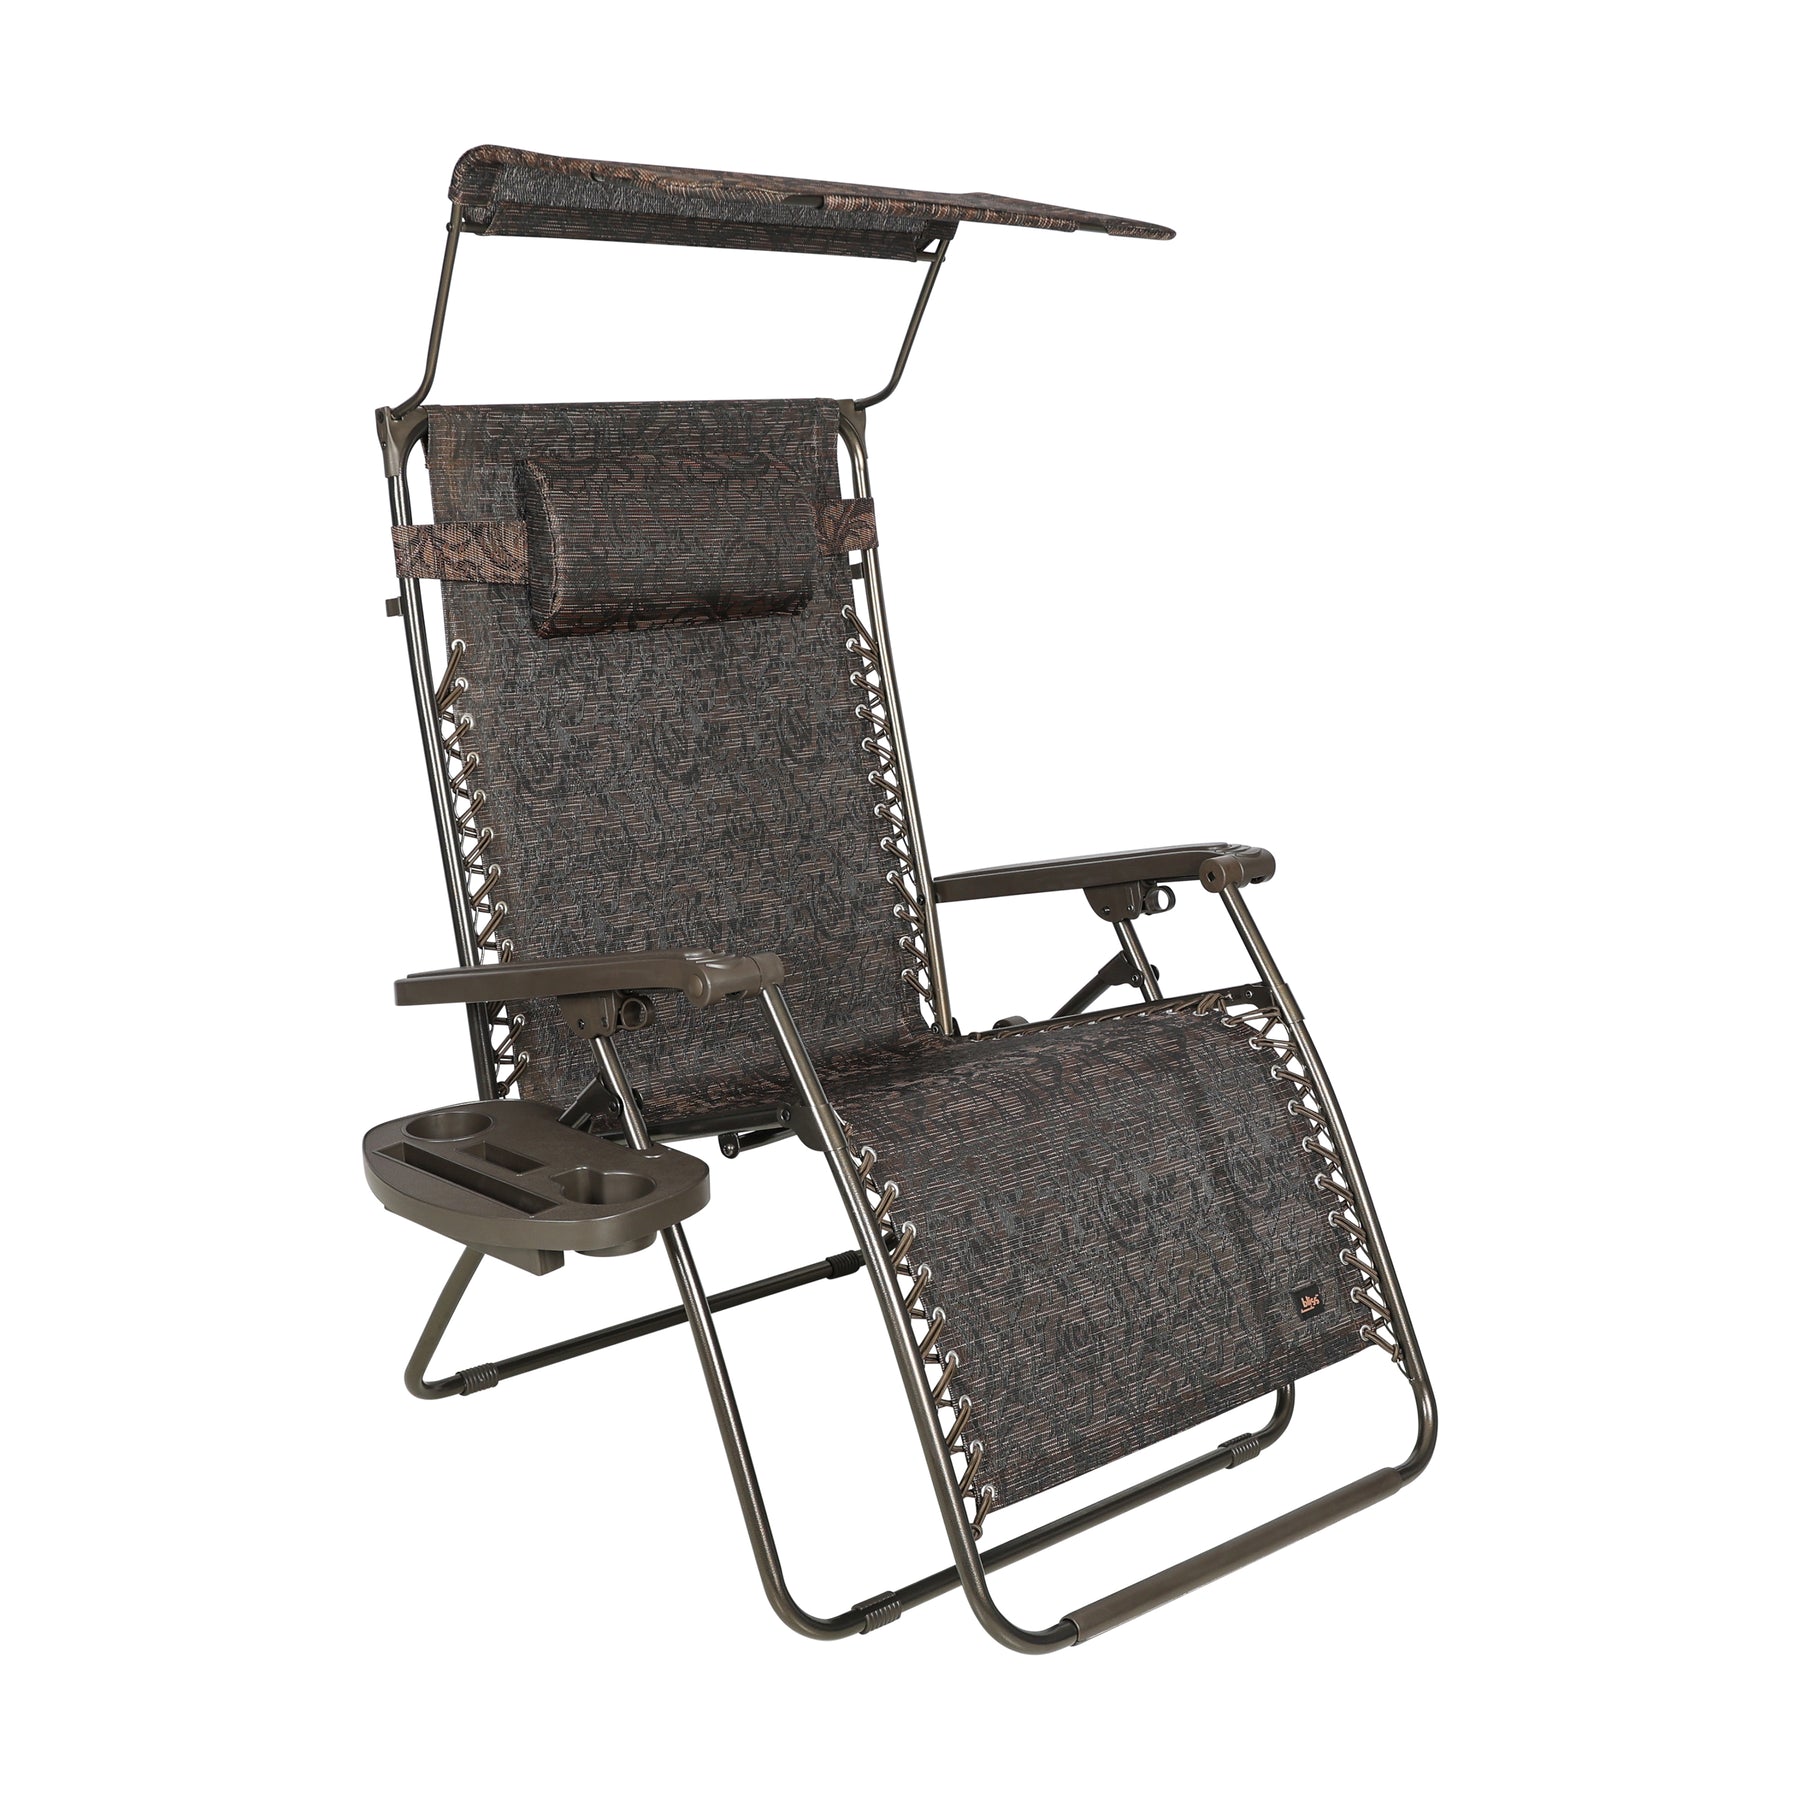 Bliss Hammocks 33-inch Wide XXL Zero Gravity Chair with Adjustable Canopy Sun-Shade, Drink Tray, and Adjustable Pillow in the brown jacquard variation.